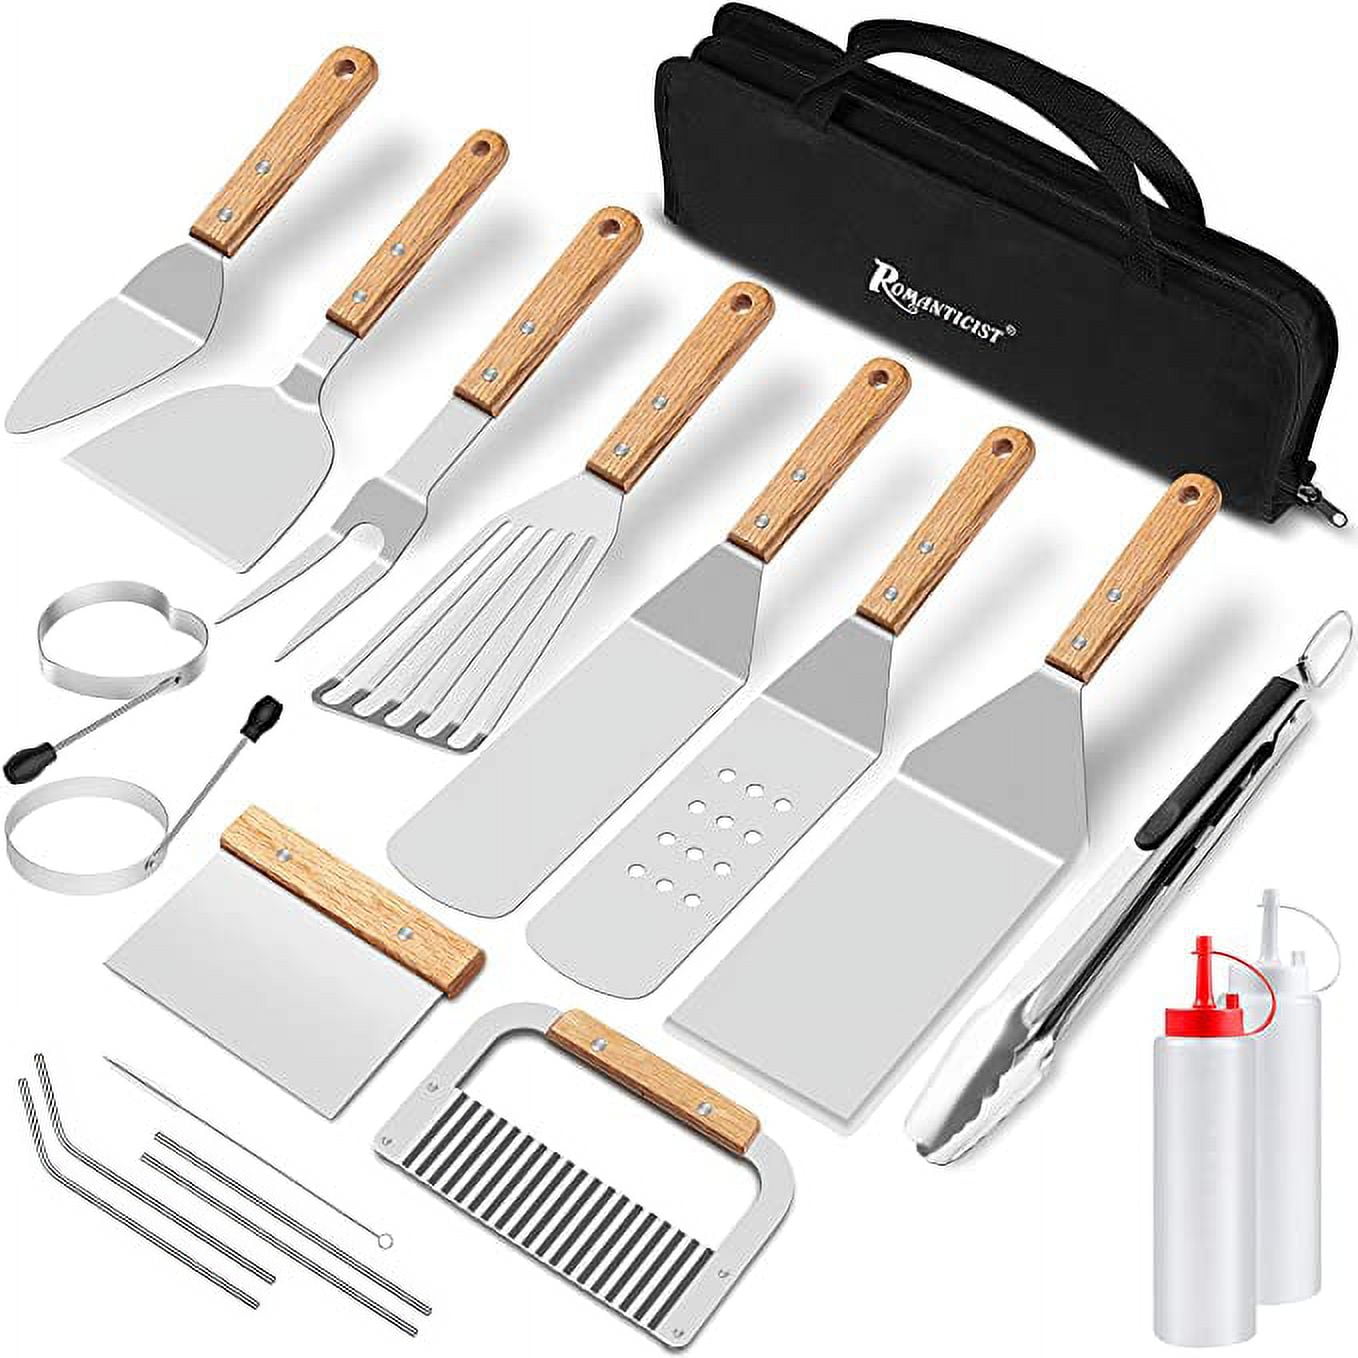 ROMANTICIST 20pcs BBQ Griddle Accessories Scraper Kit, Tongs, Steel Teppanyaki, Cooking Hibachi, for Wooden Top, Tool Tailgating Duty Stainless Set, Flat Heavy Utensils Grill Spatula, Camping, Handle